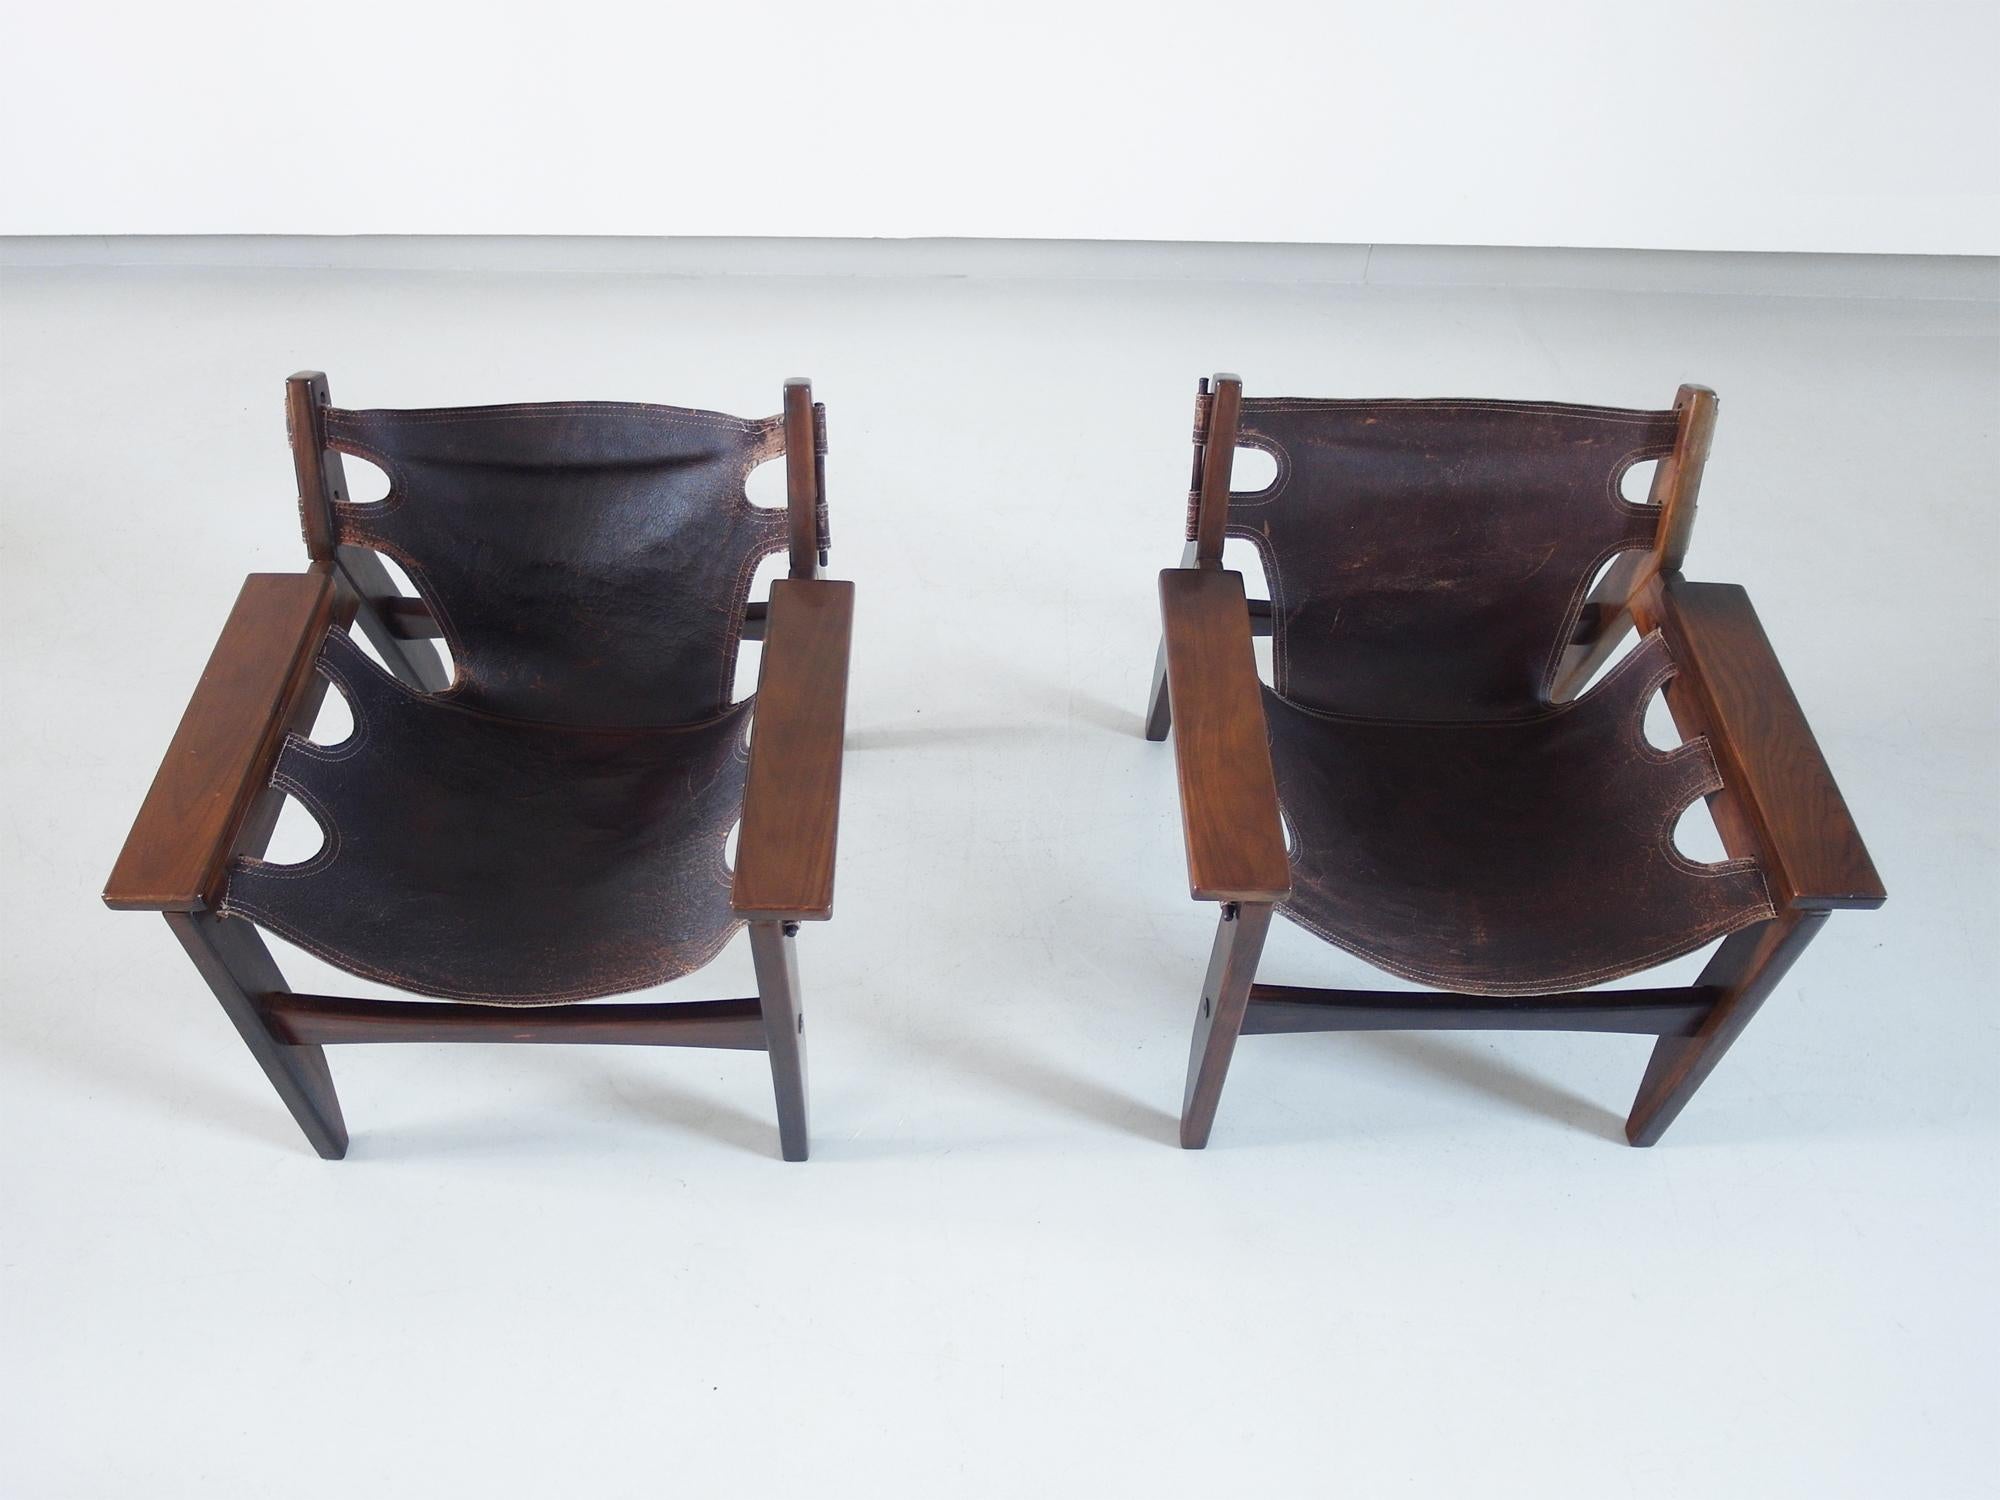 Late 20th Century Pair of Sergio Rodrigues Kilin Lounge Chairs for Oca, Brazil, 1973 For Sale